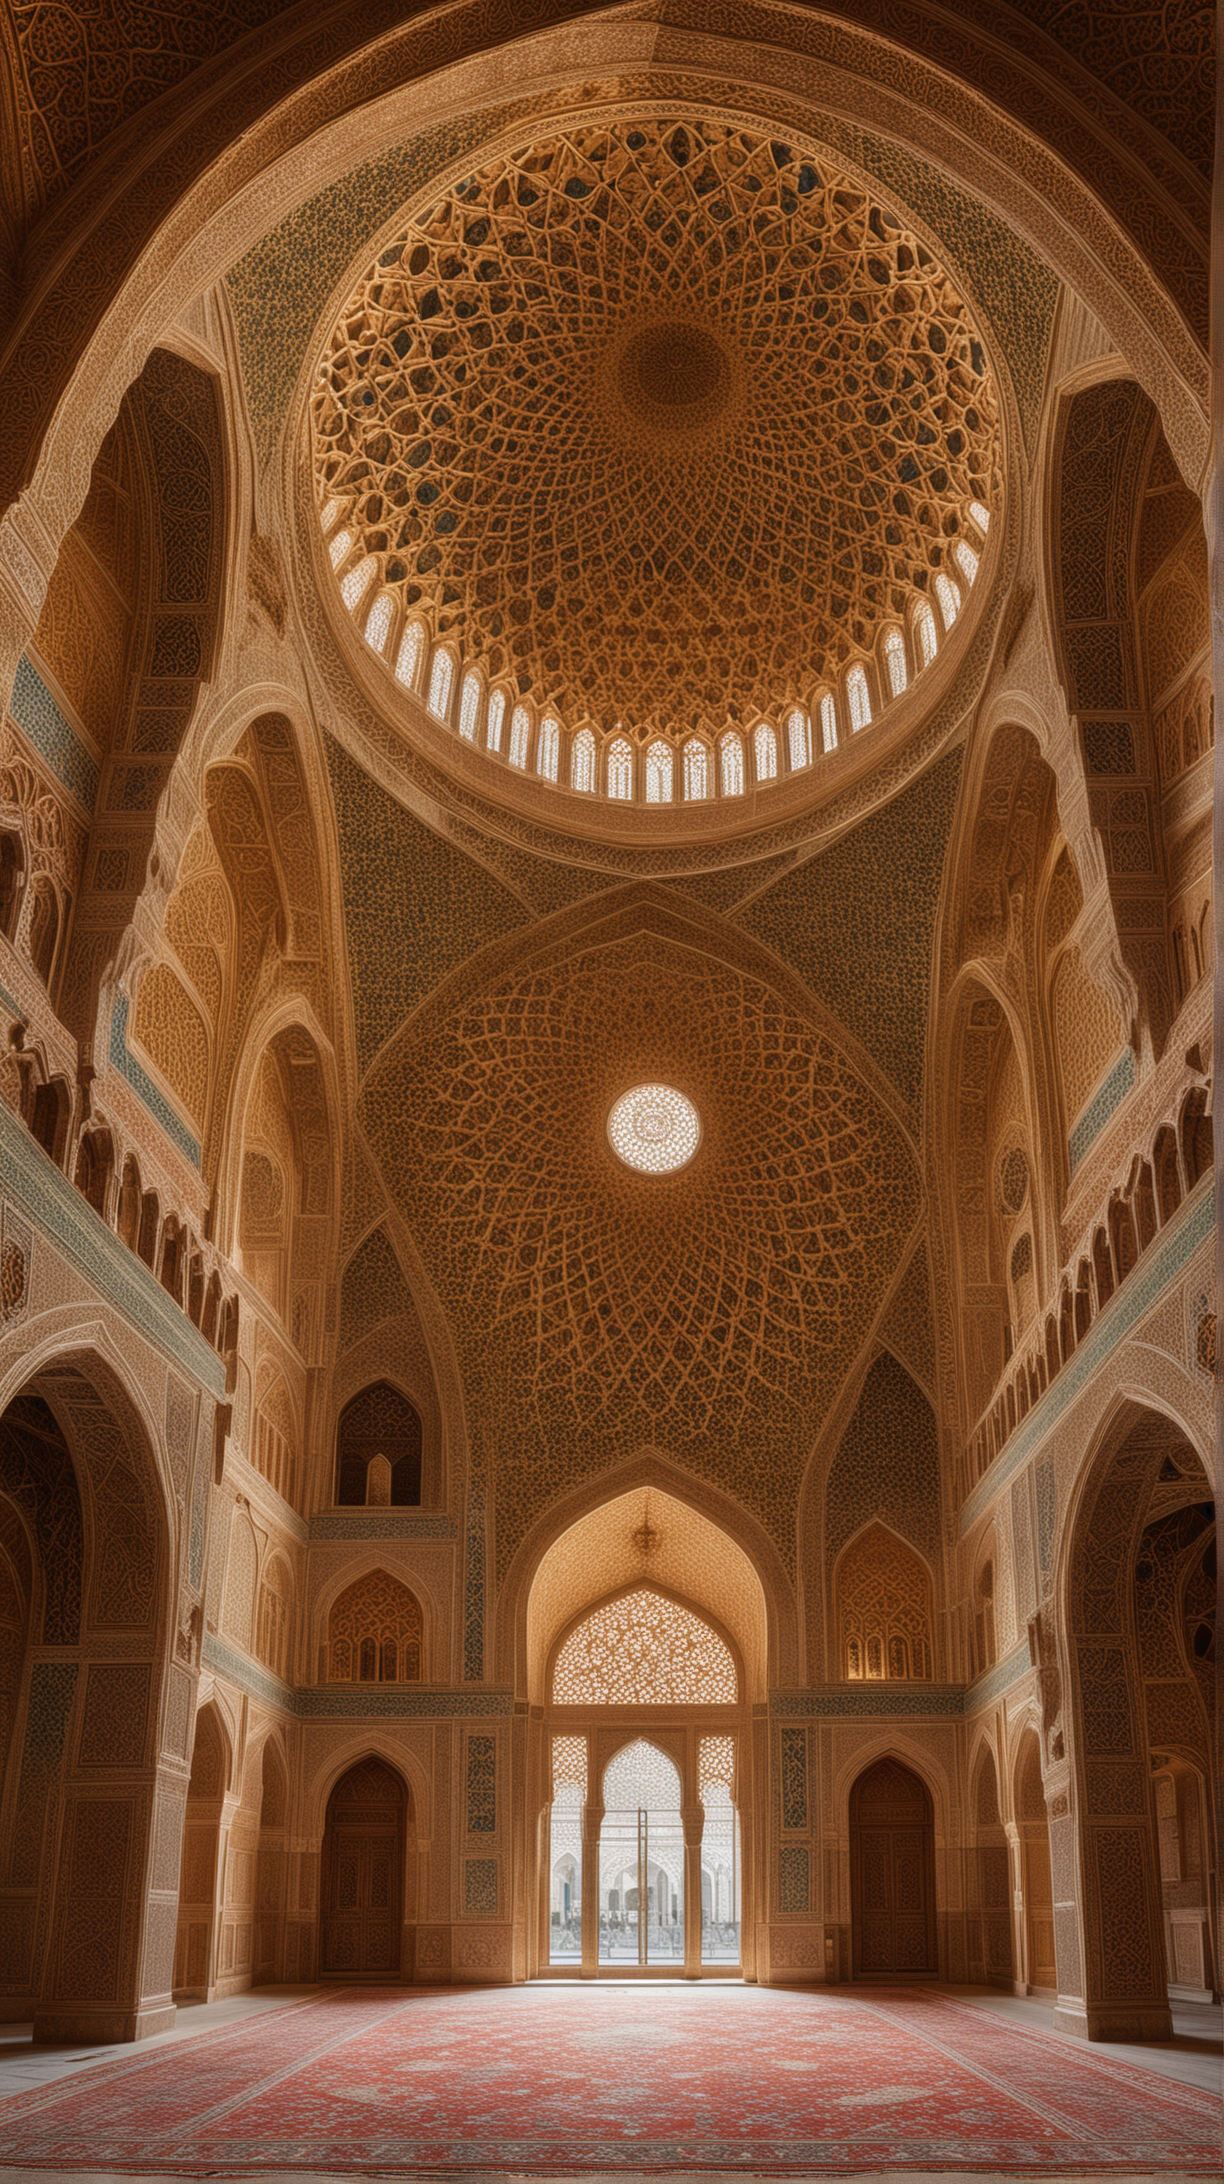 Islamic Architecture Intricate Geometric Patterns in Historic Mosques and Palaces